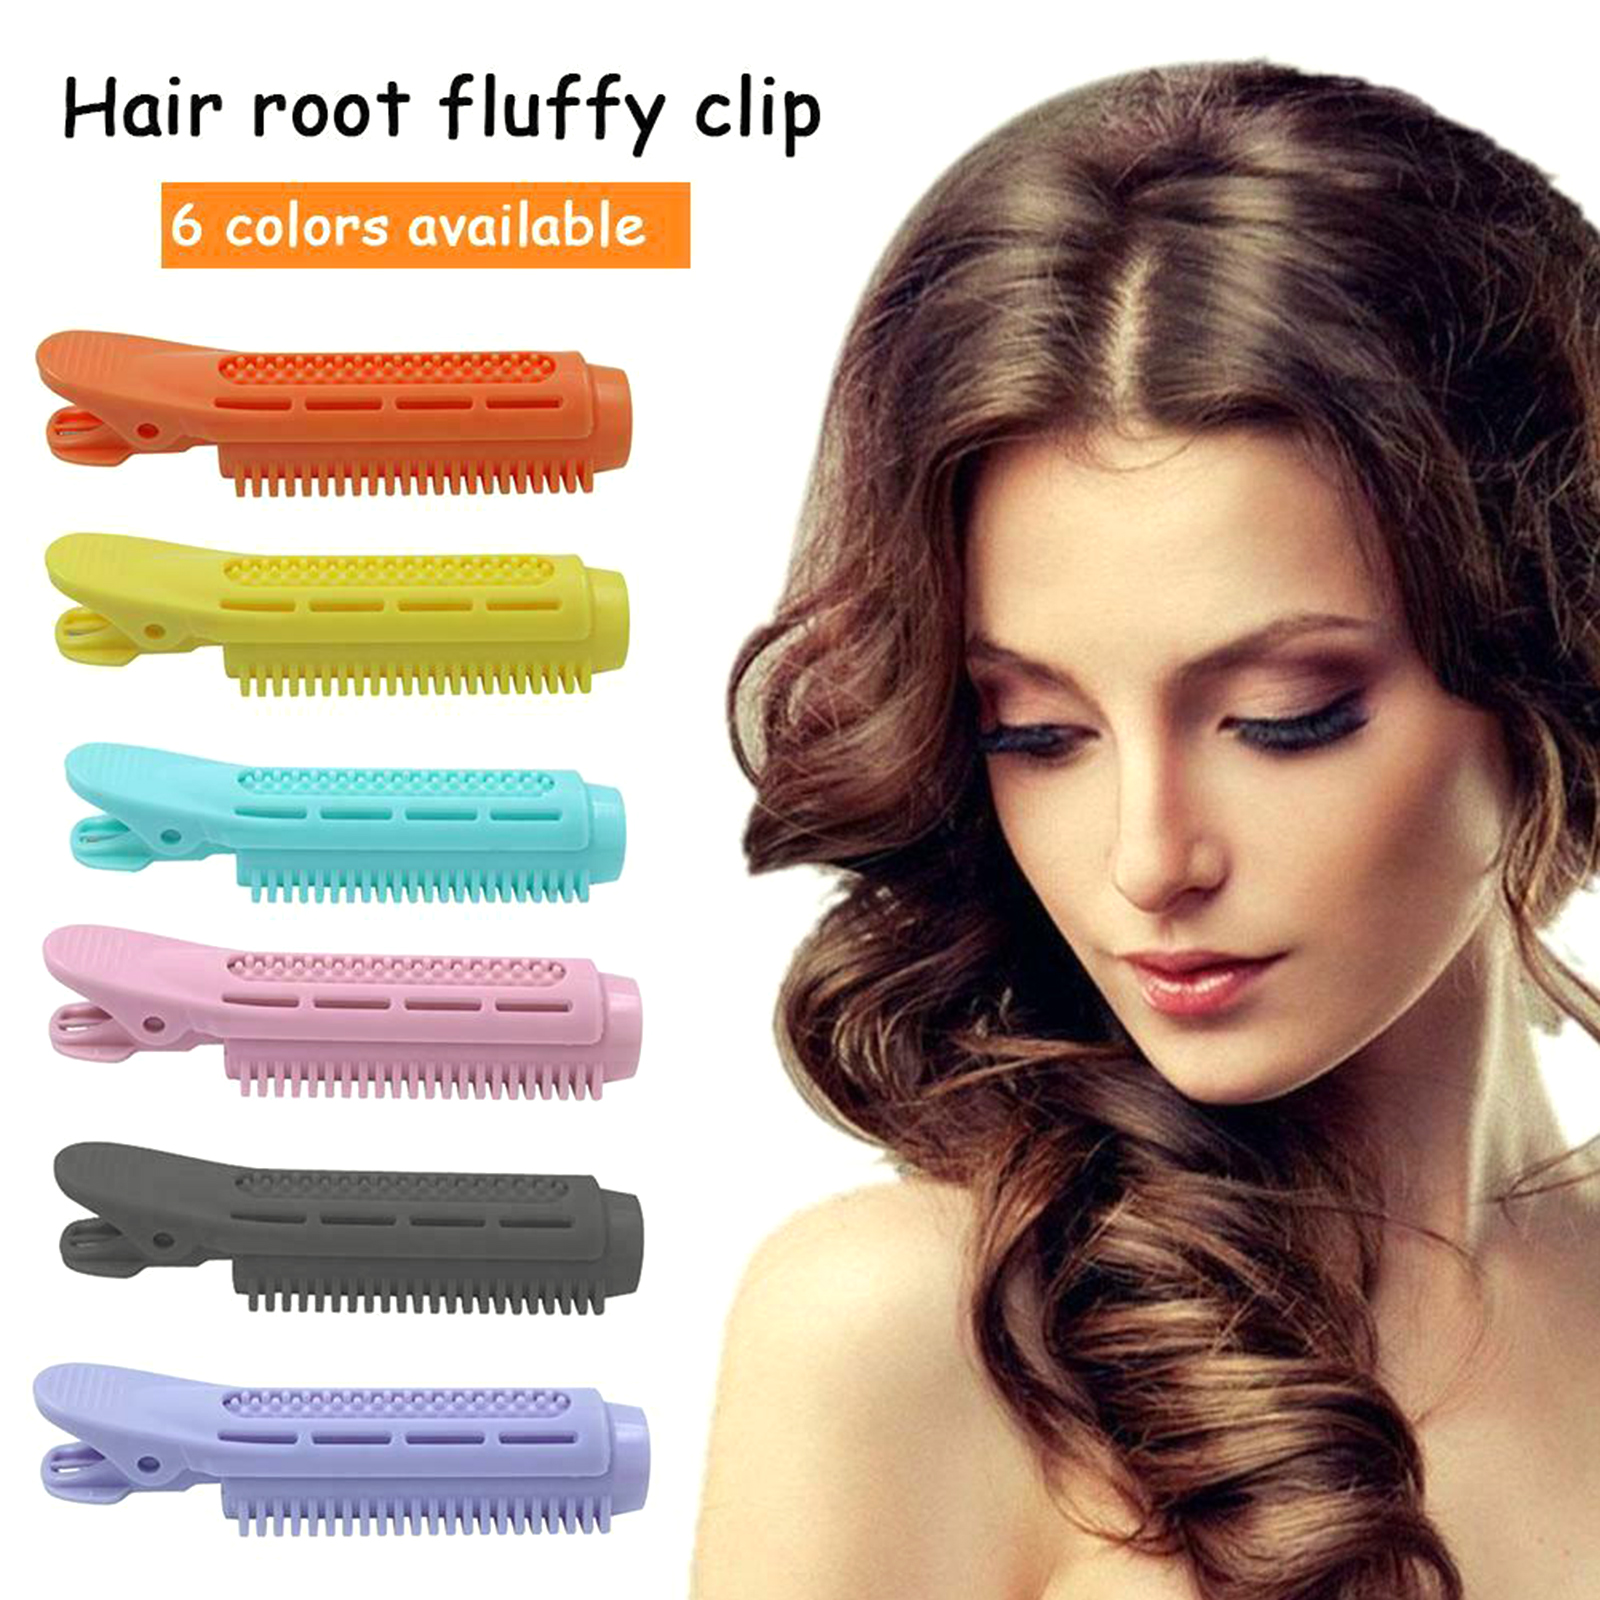 Aibecy 6 Pcs Styling Curling Clip Self Grip Root Volume Fluffy Hair Curler Clip Perm for Hair Styling - image 4 of 7